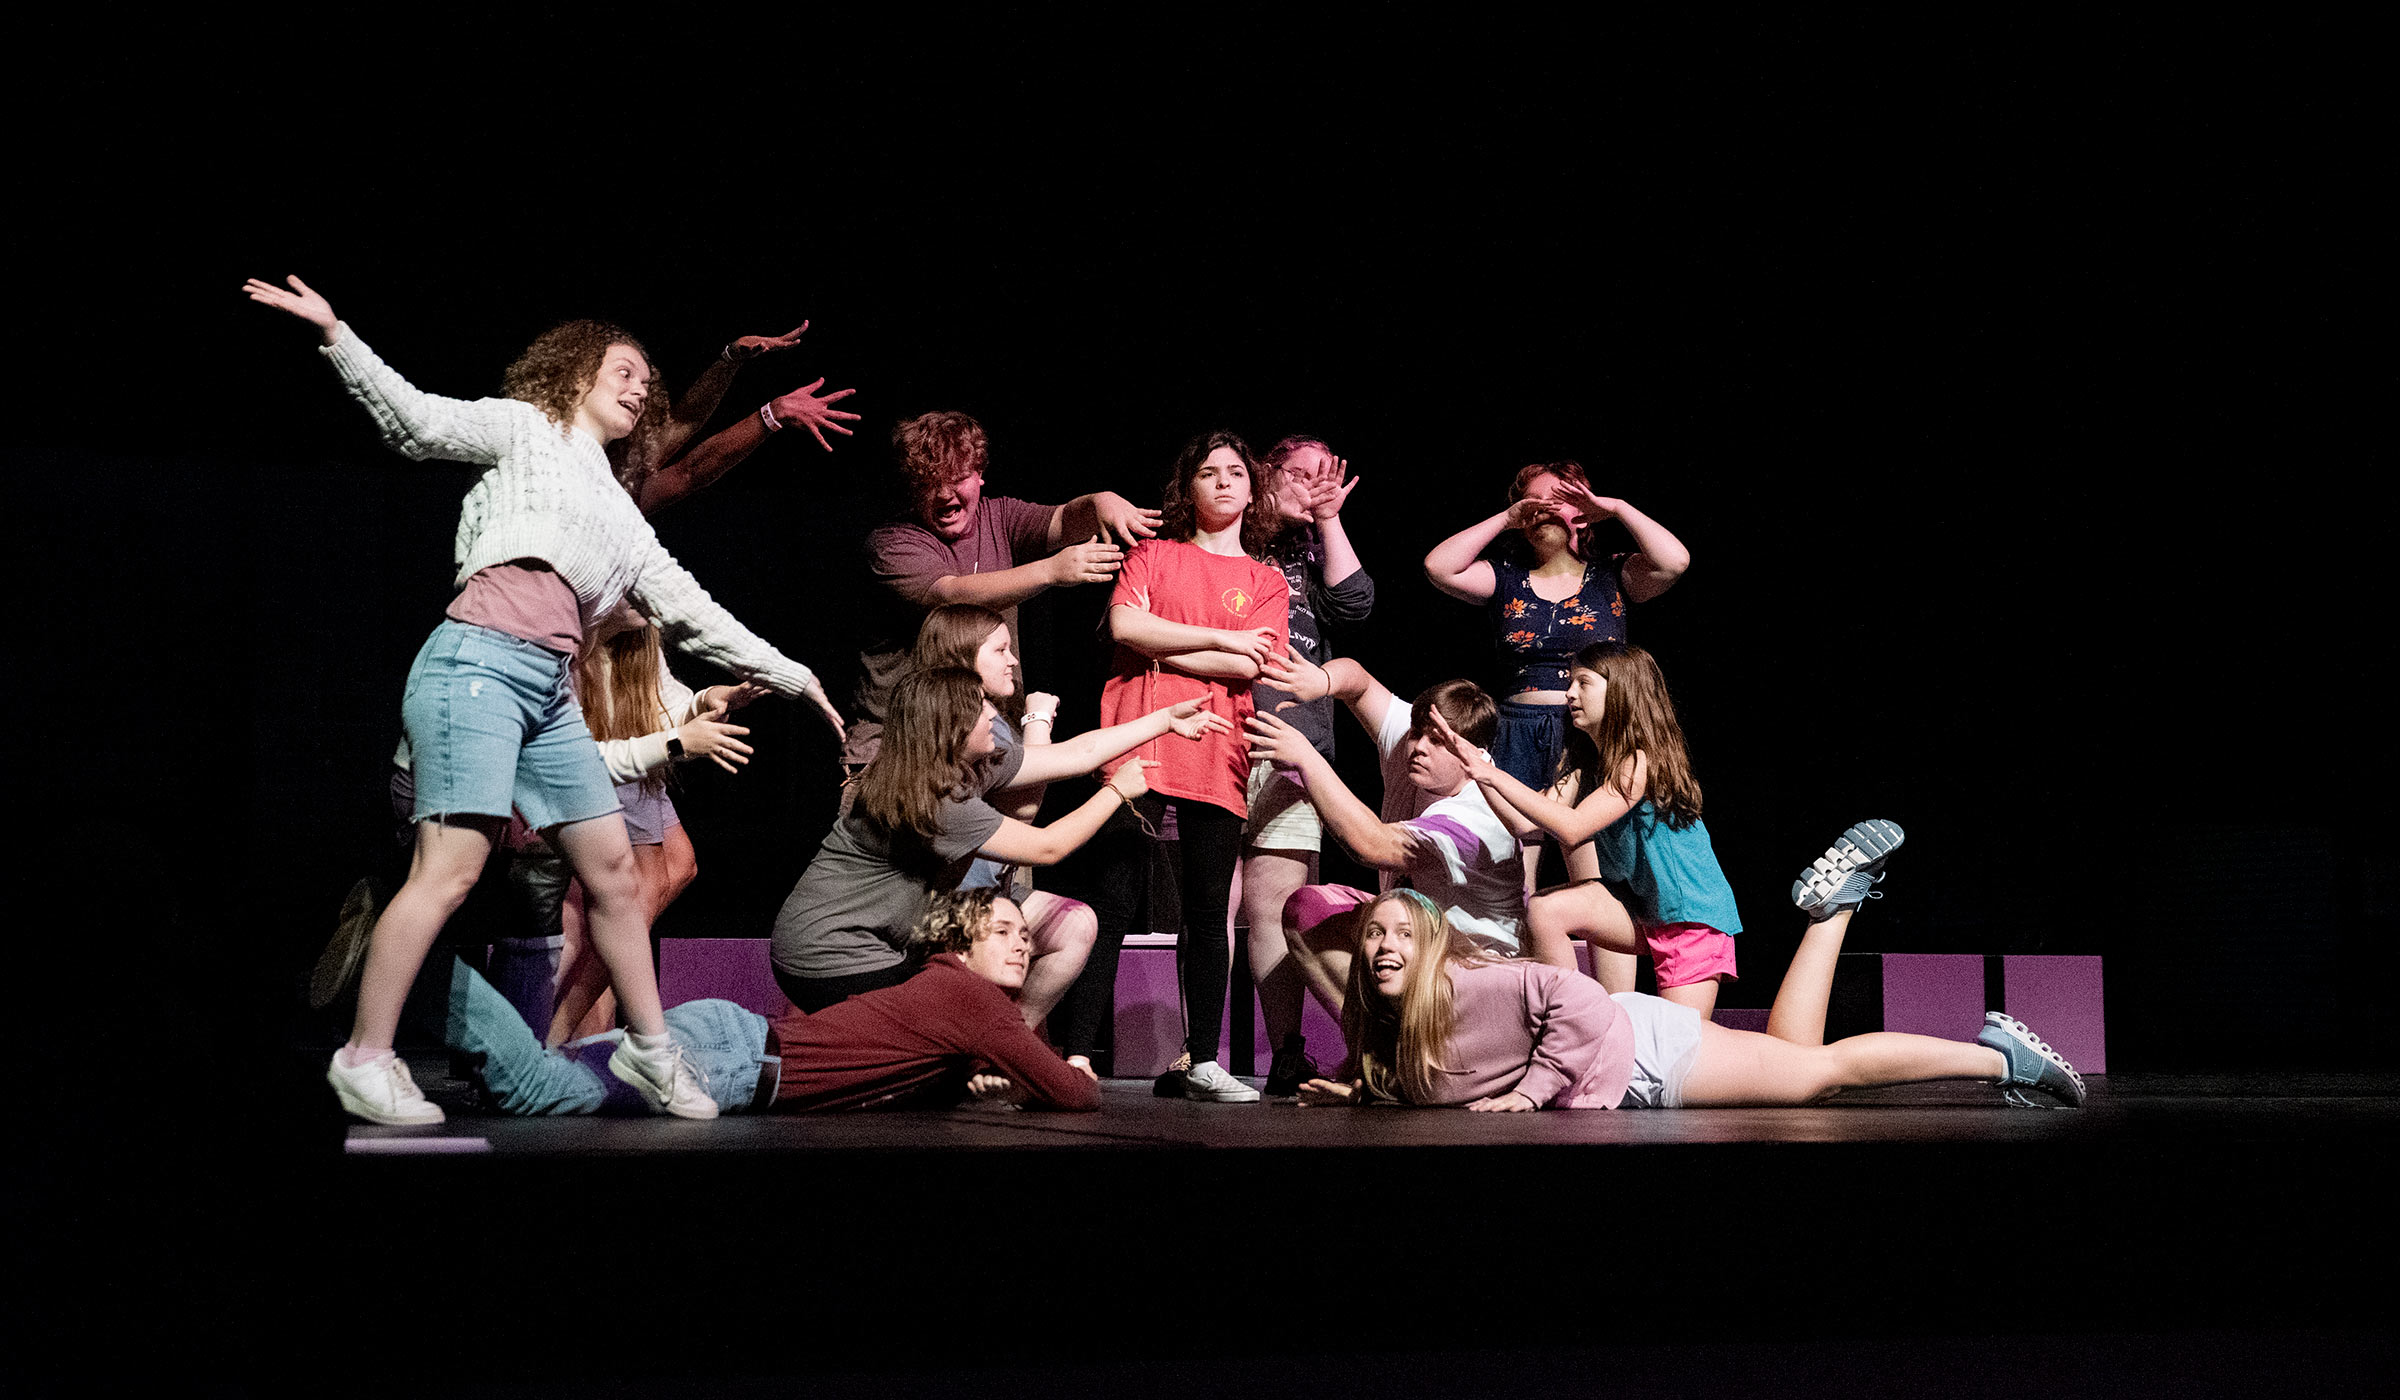 High school students posed on stage during rehearsal of musical